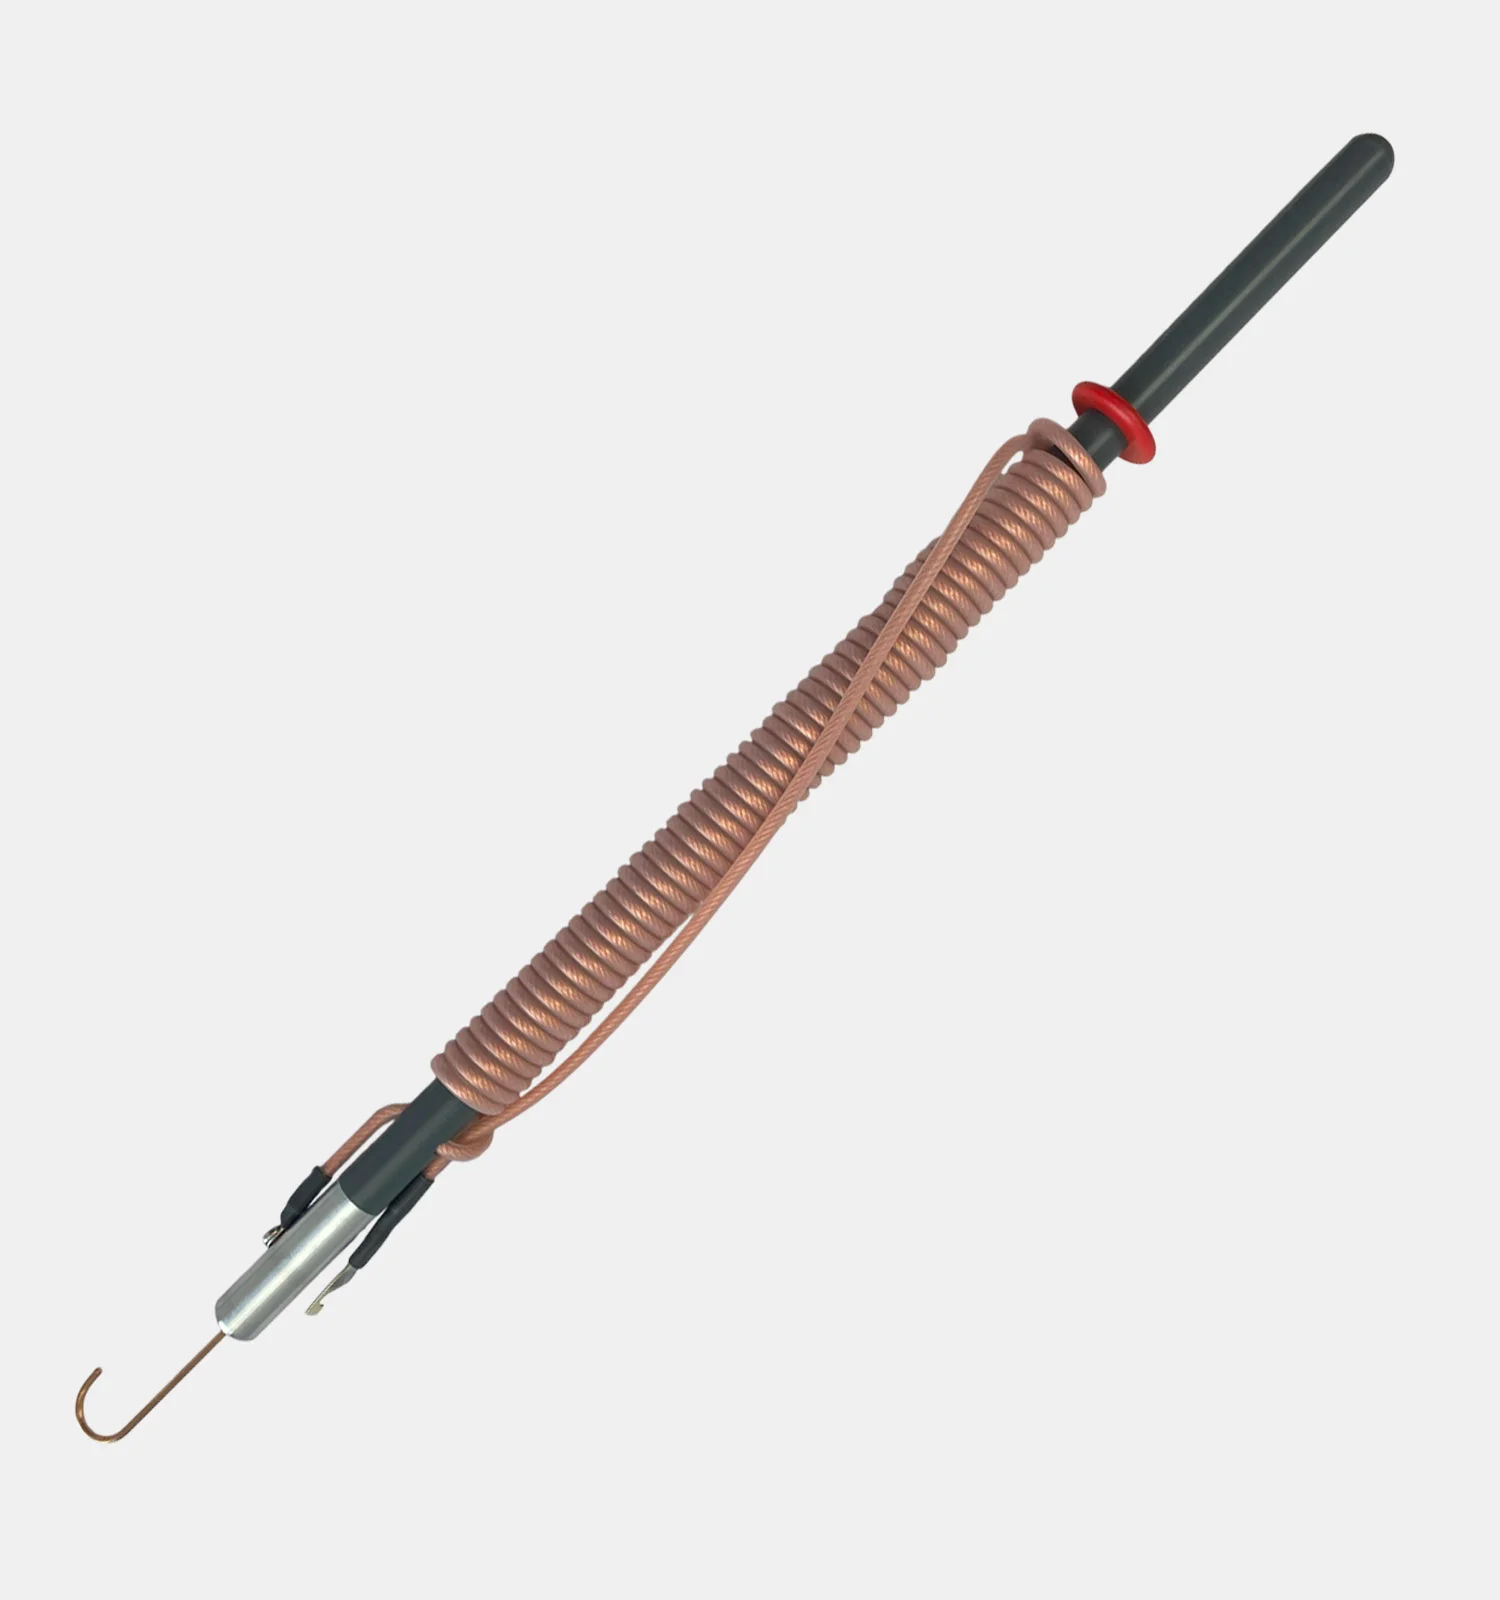 UK Suppliers of ES30 Earthing Stick